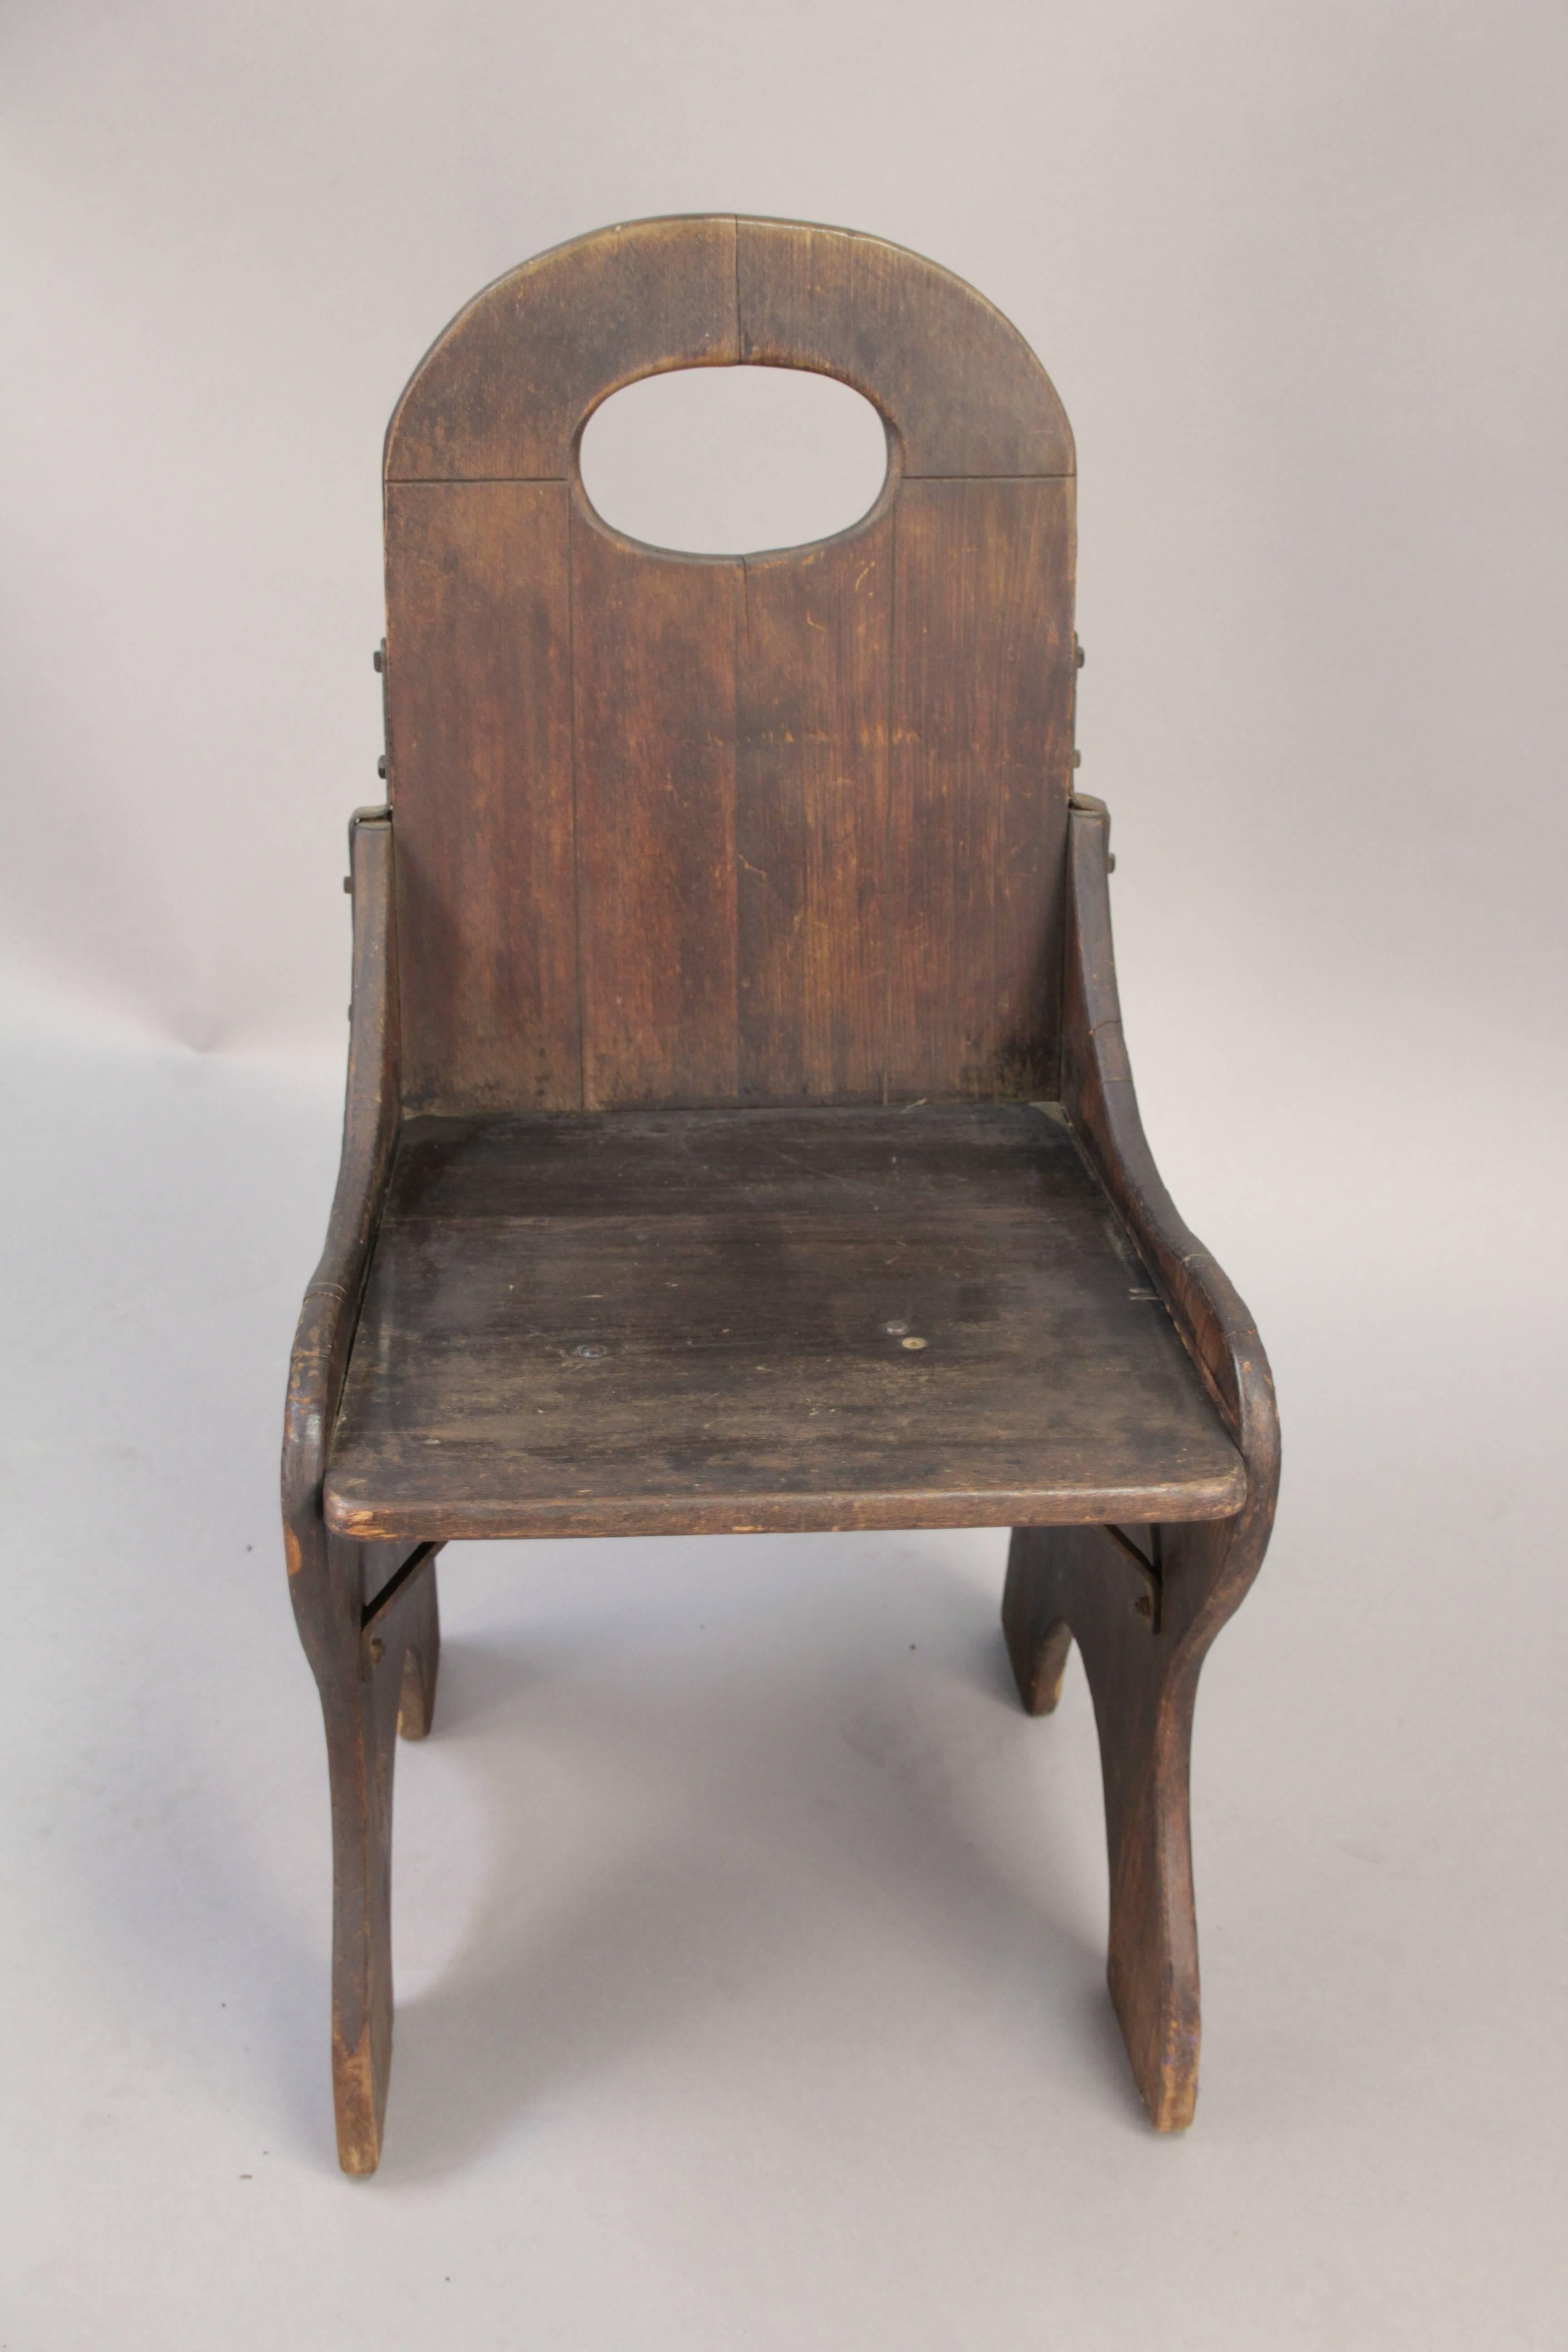 Rancho Monterey 1930s Monterey Monks Chair in All Original Old Wood Finish